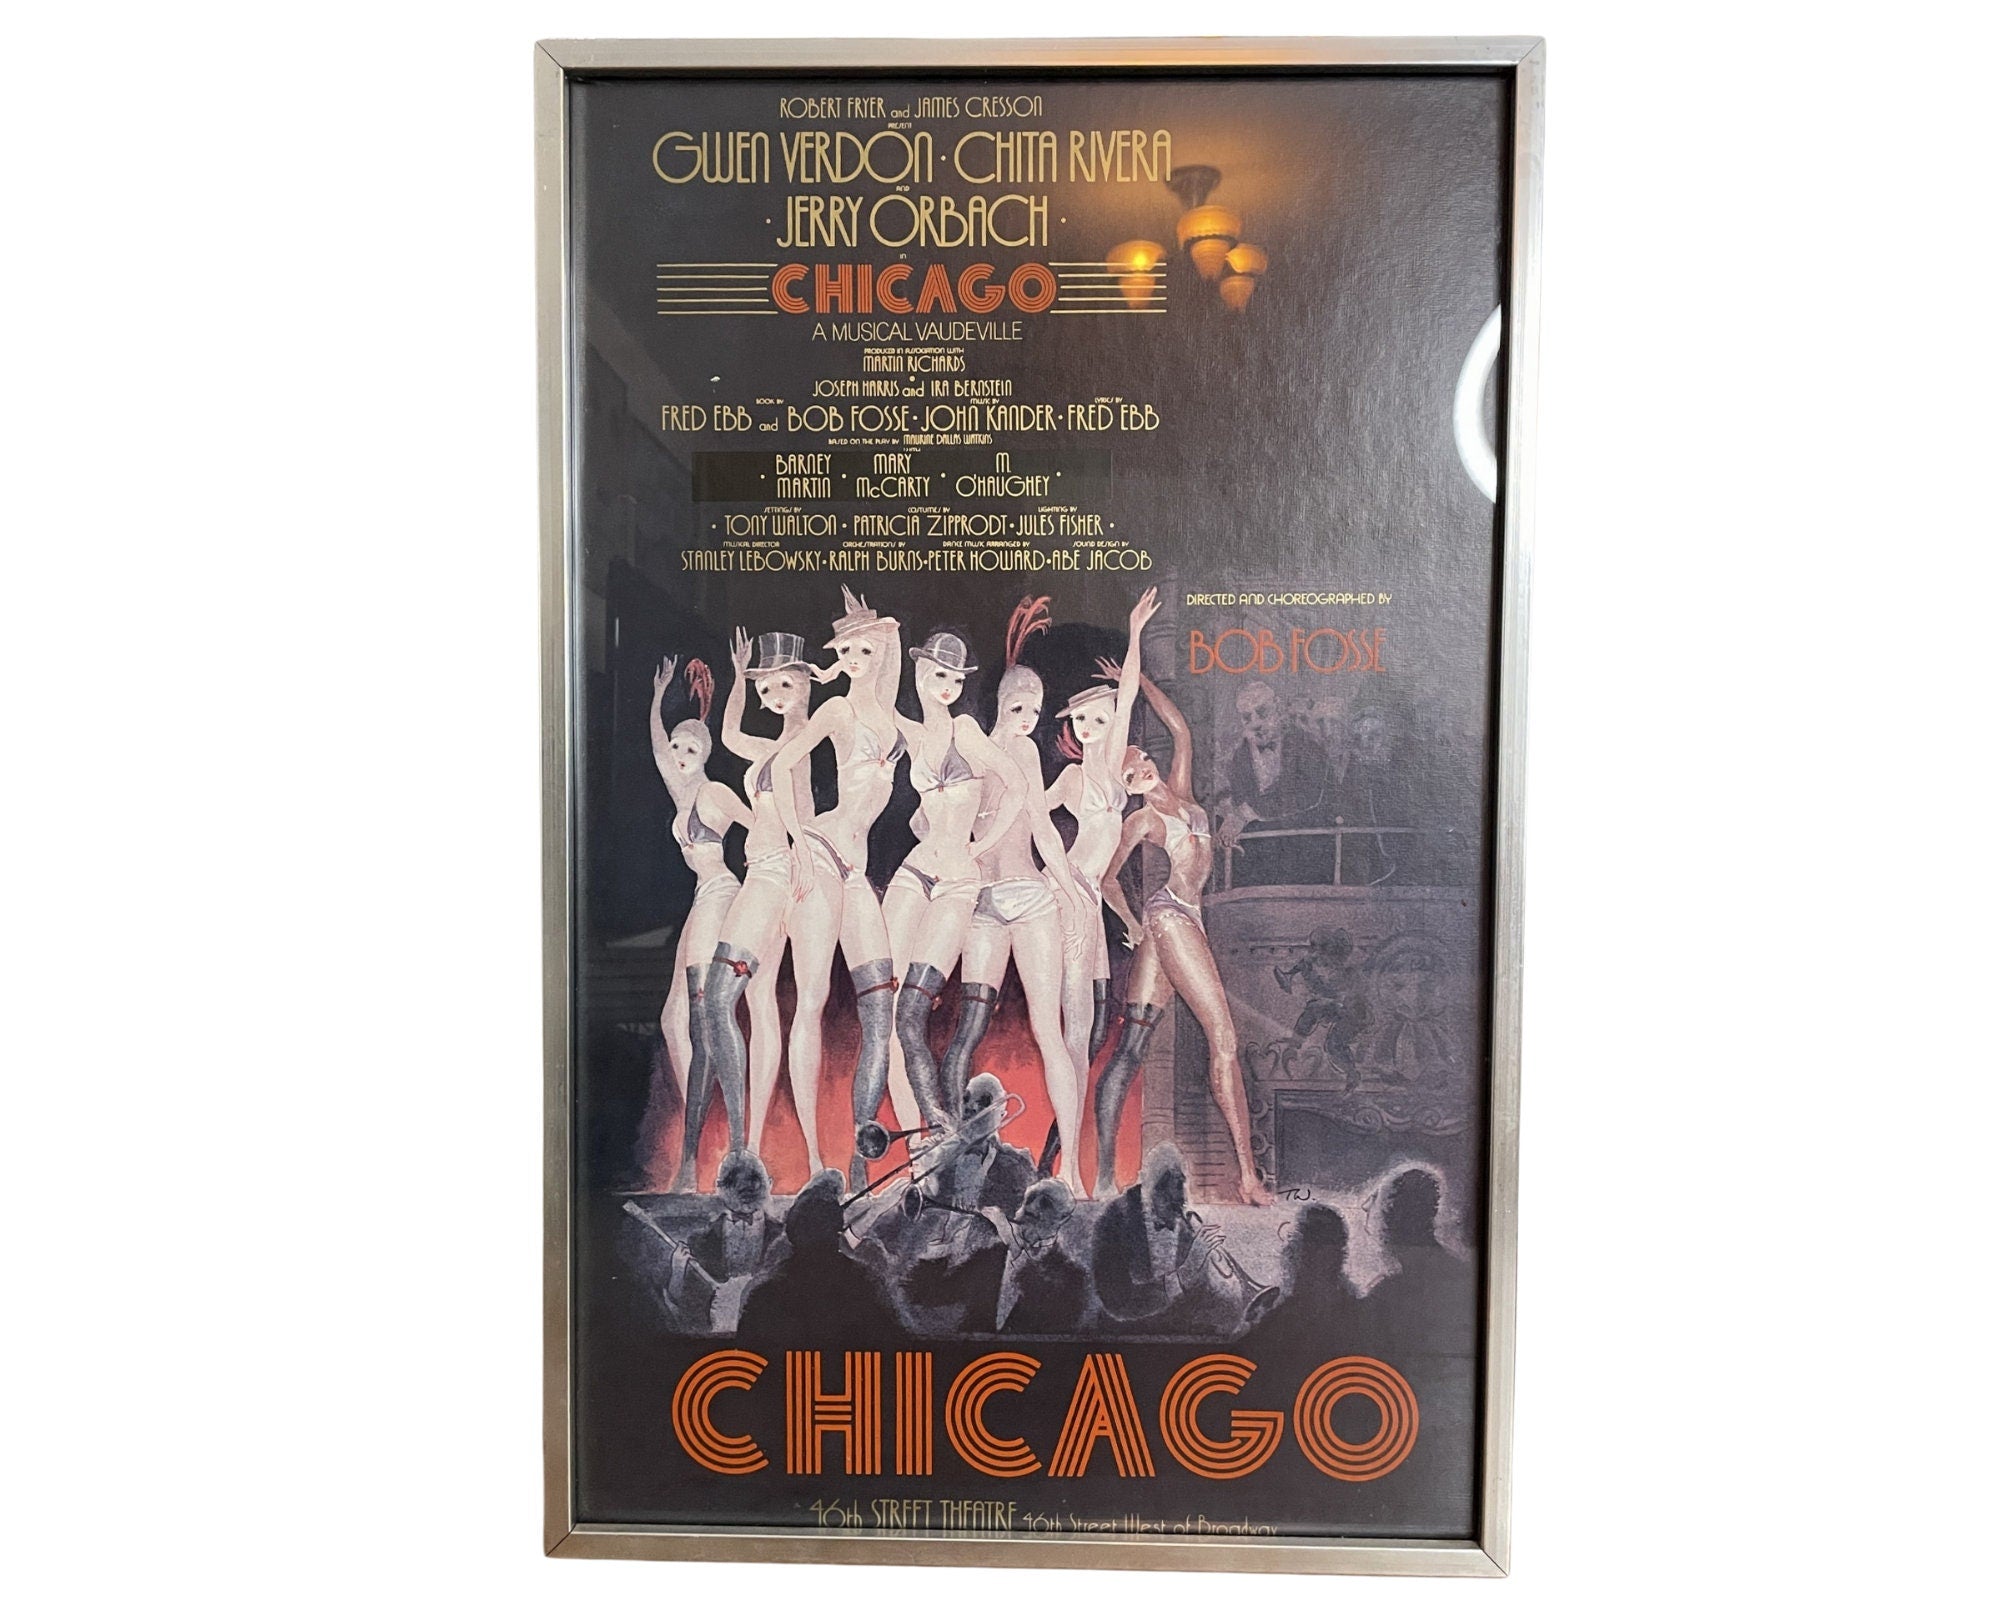 Framed Original Vintage 1975 Broadway Musical Poster of "Chicago" at The 46th St Theatre, NYC 14" x 22" | Living Room Gallery Wall Decor